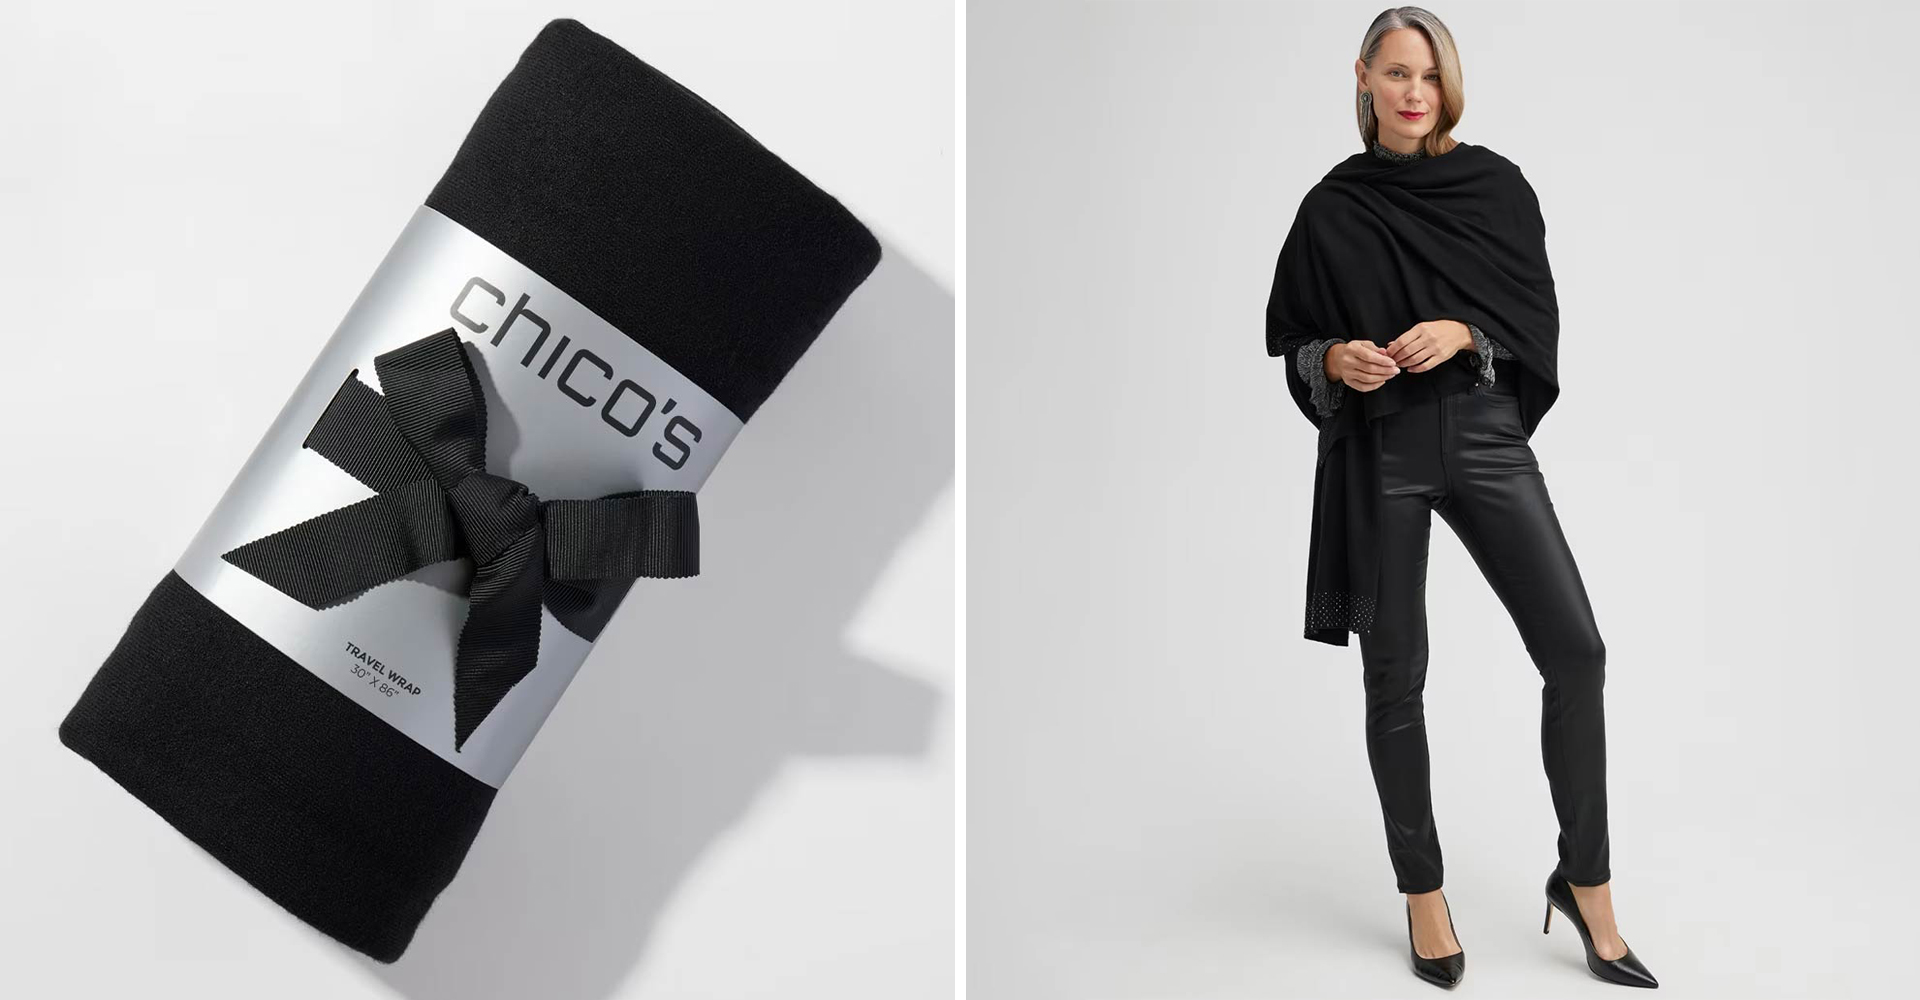  Chico’s laydown of rolled-up packaged black cashmere sweater wrap next to model wearing wrap, black pants, and heels.